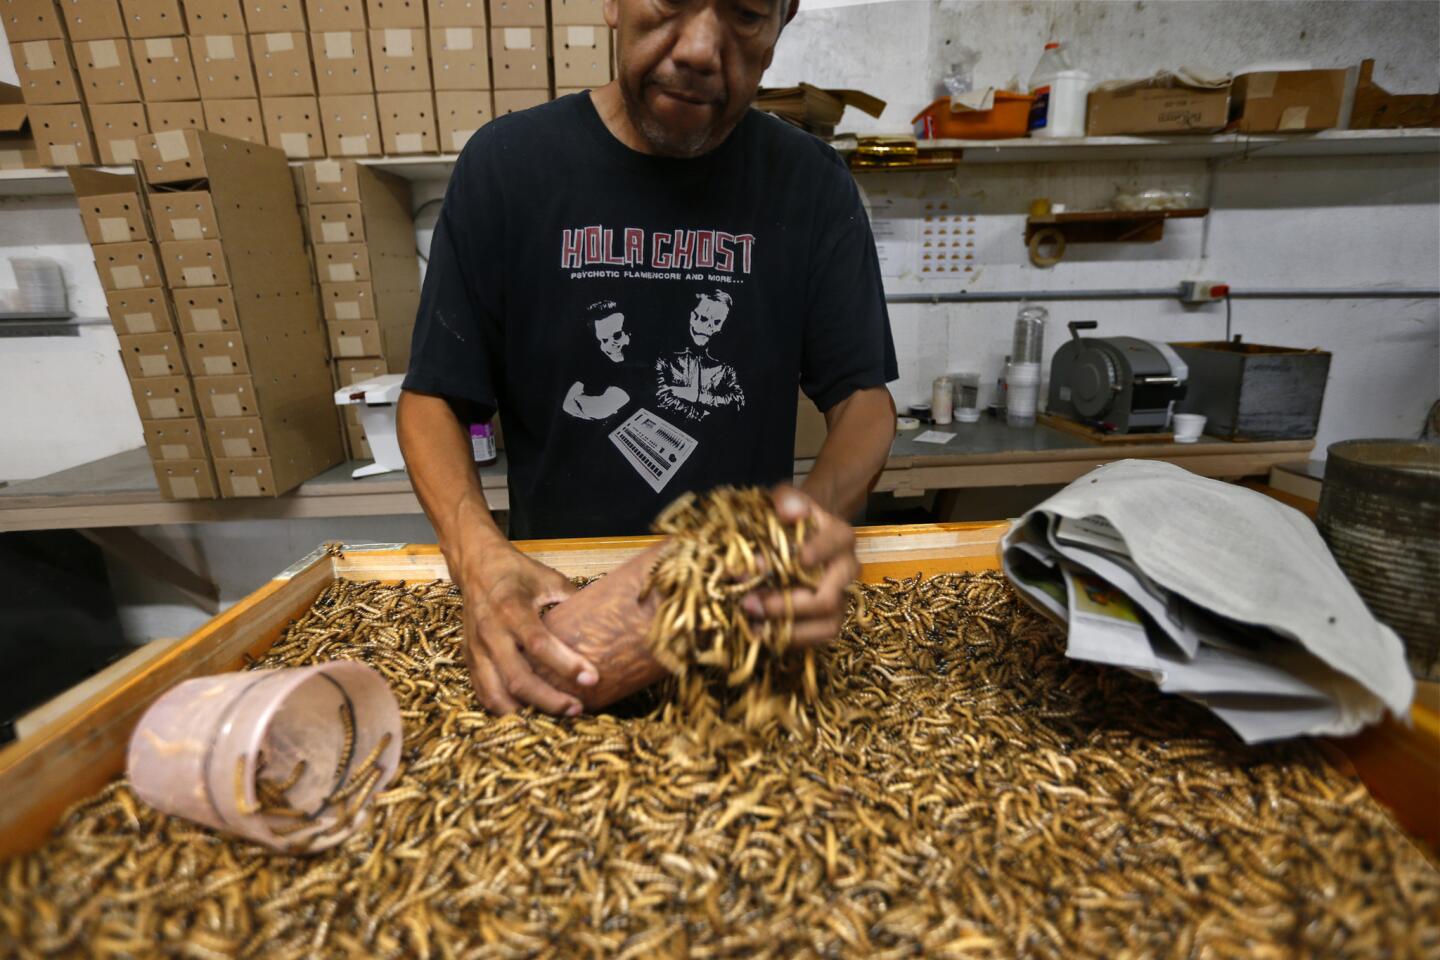 Shipping supervisor Raul Nieves scoops up a container of live "Superworm" brand giant mealworms that are shipped throughout North America for people to eat.